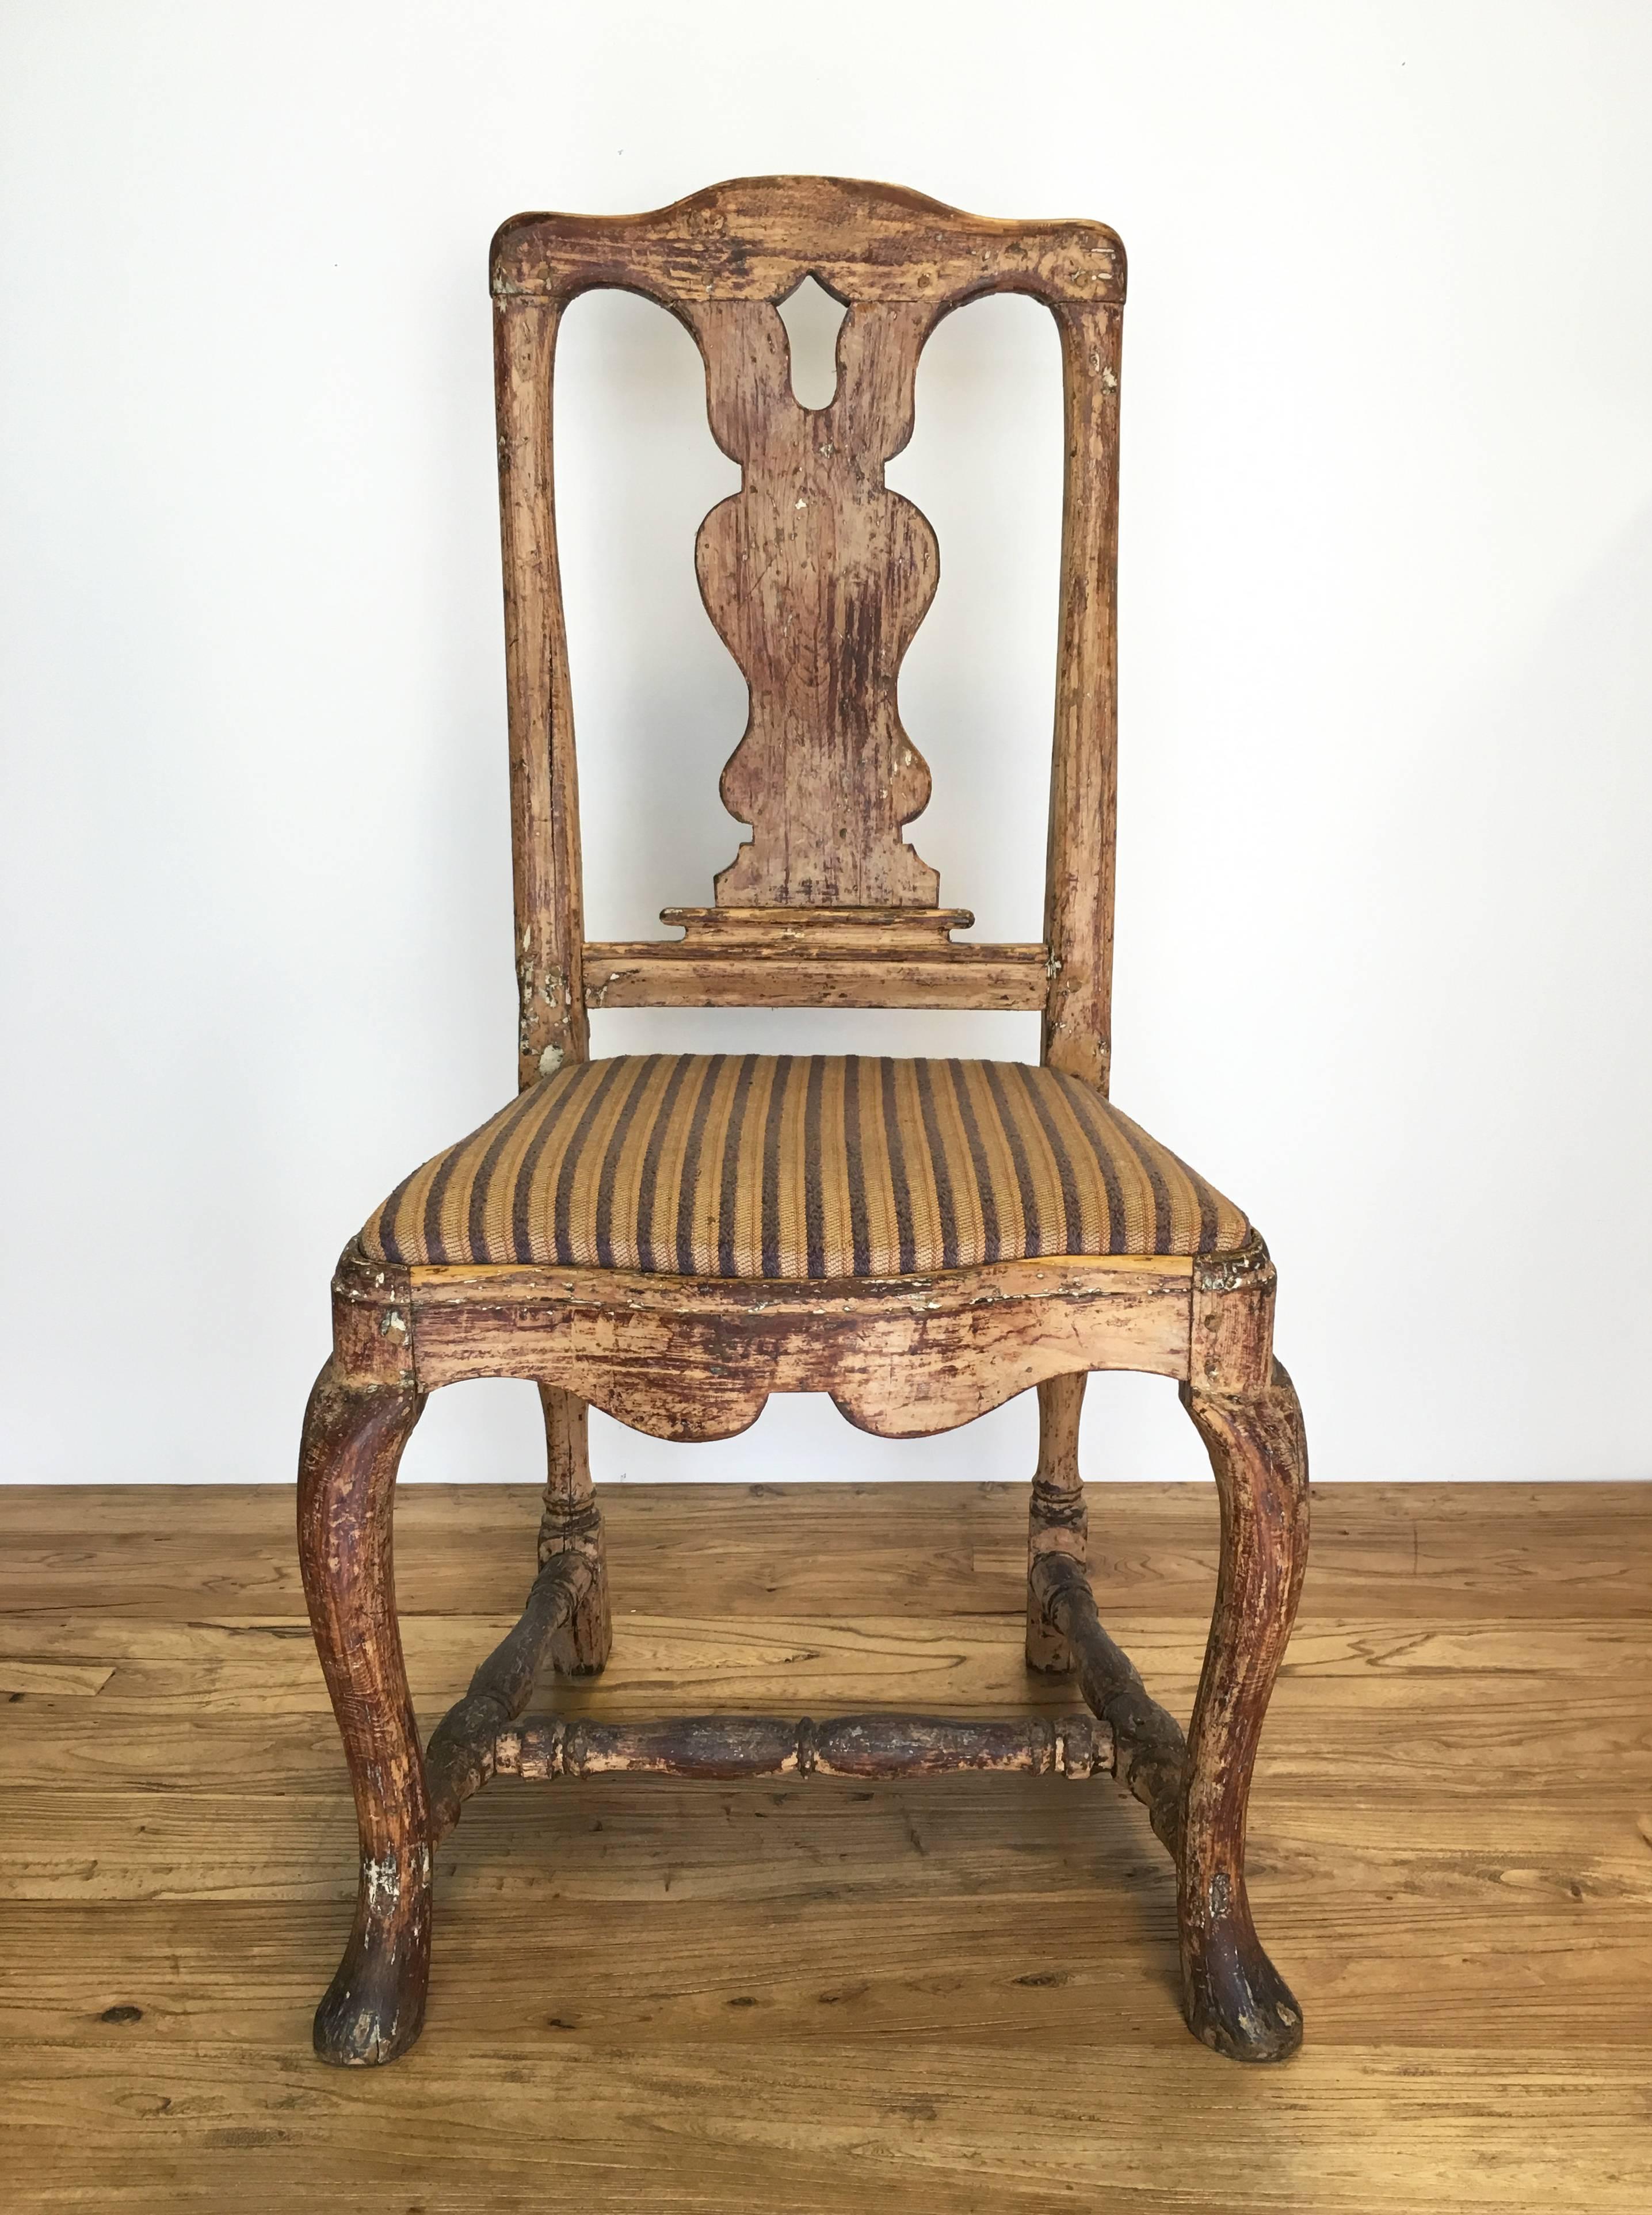 Pair of vintage Rococo chairs, from Sweden, circa 1740. Very sturdy; in vintage condition with wear consistent with age and use. Please see images for more condition details. Priced and sold as a pair.
